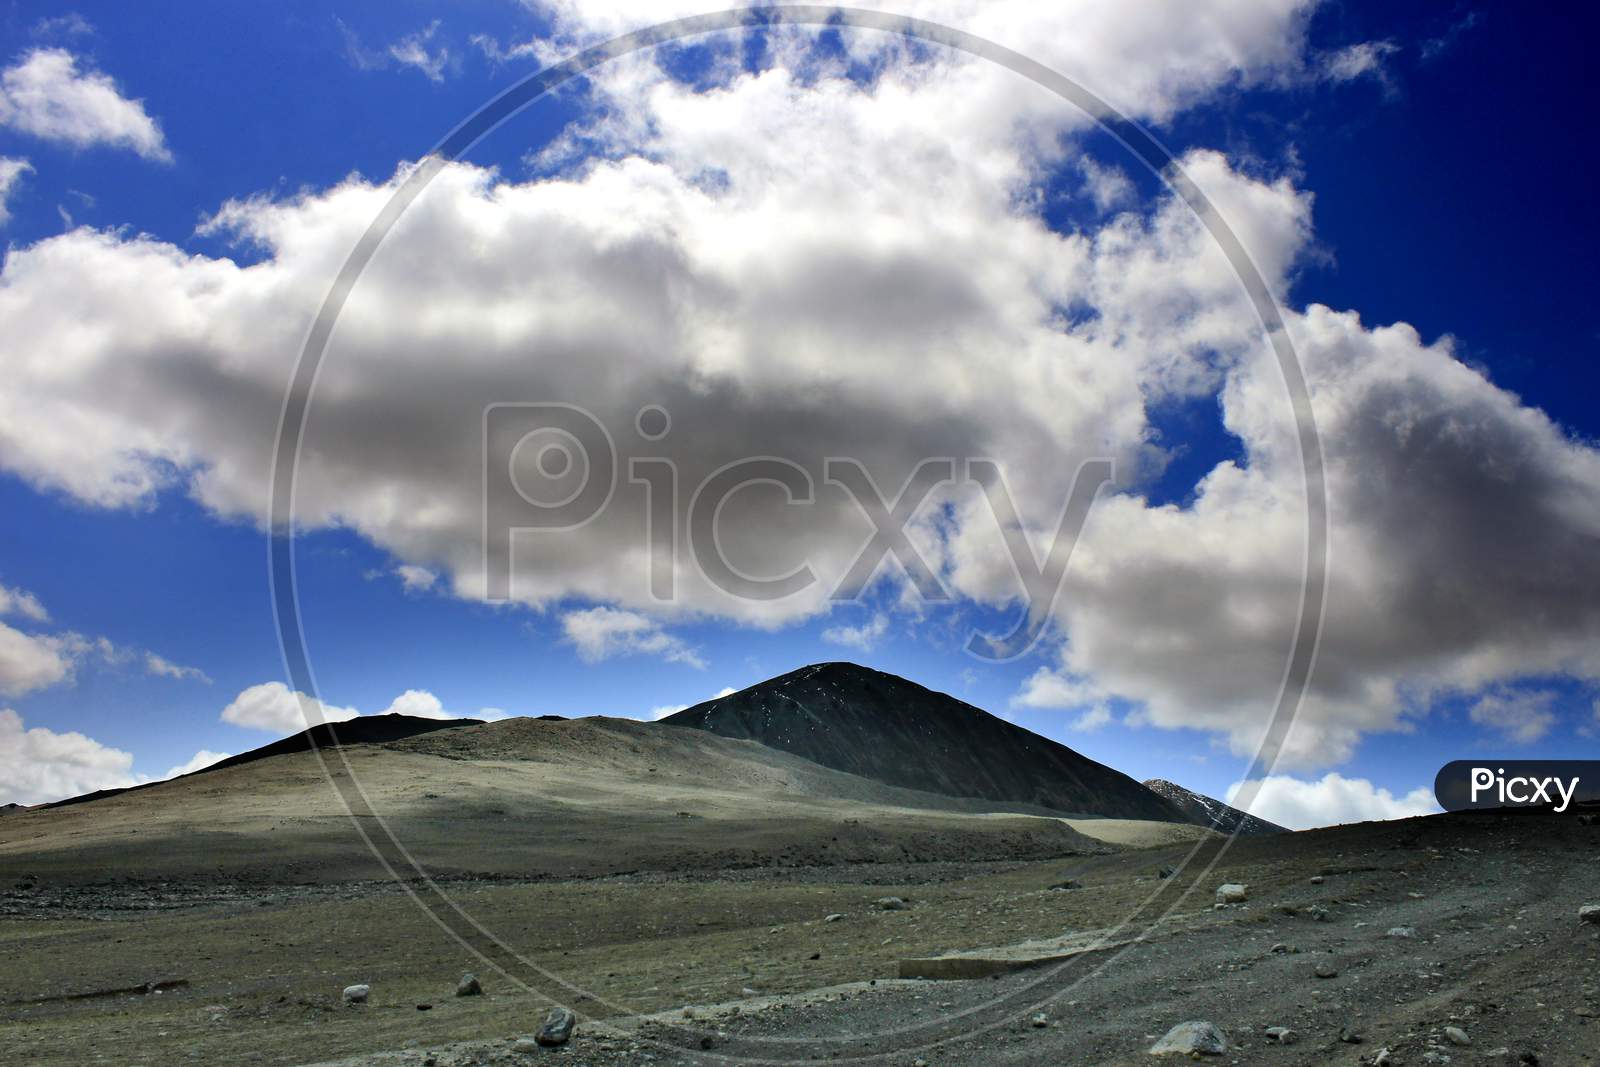 Mountains of Sikkim with Blue Sky and Huge Clouds